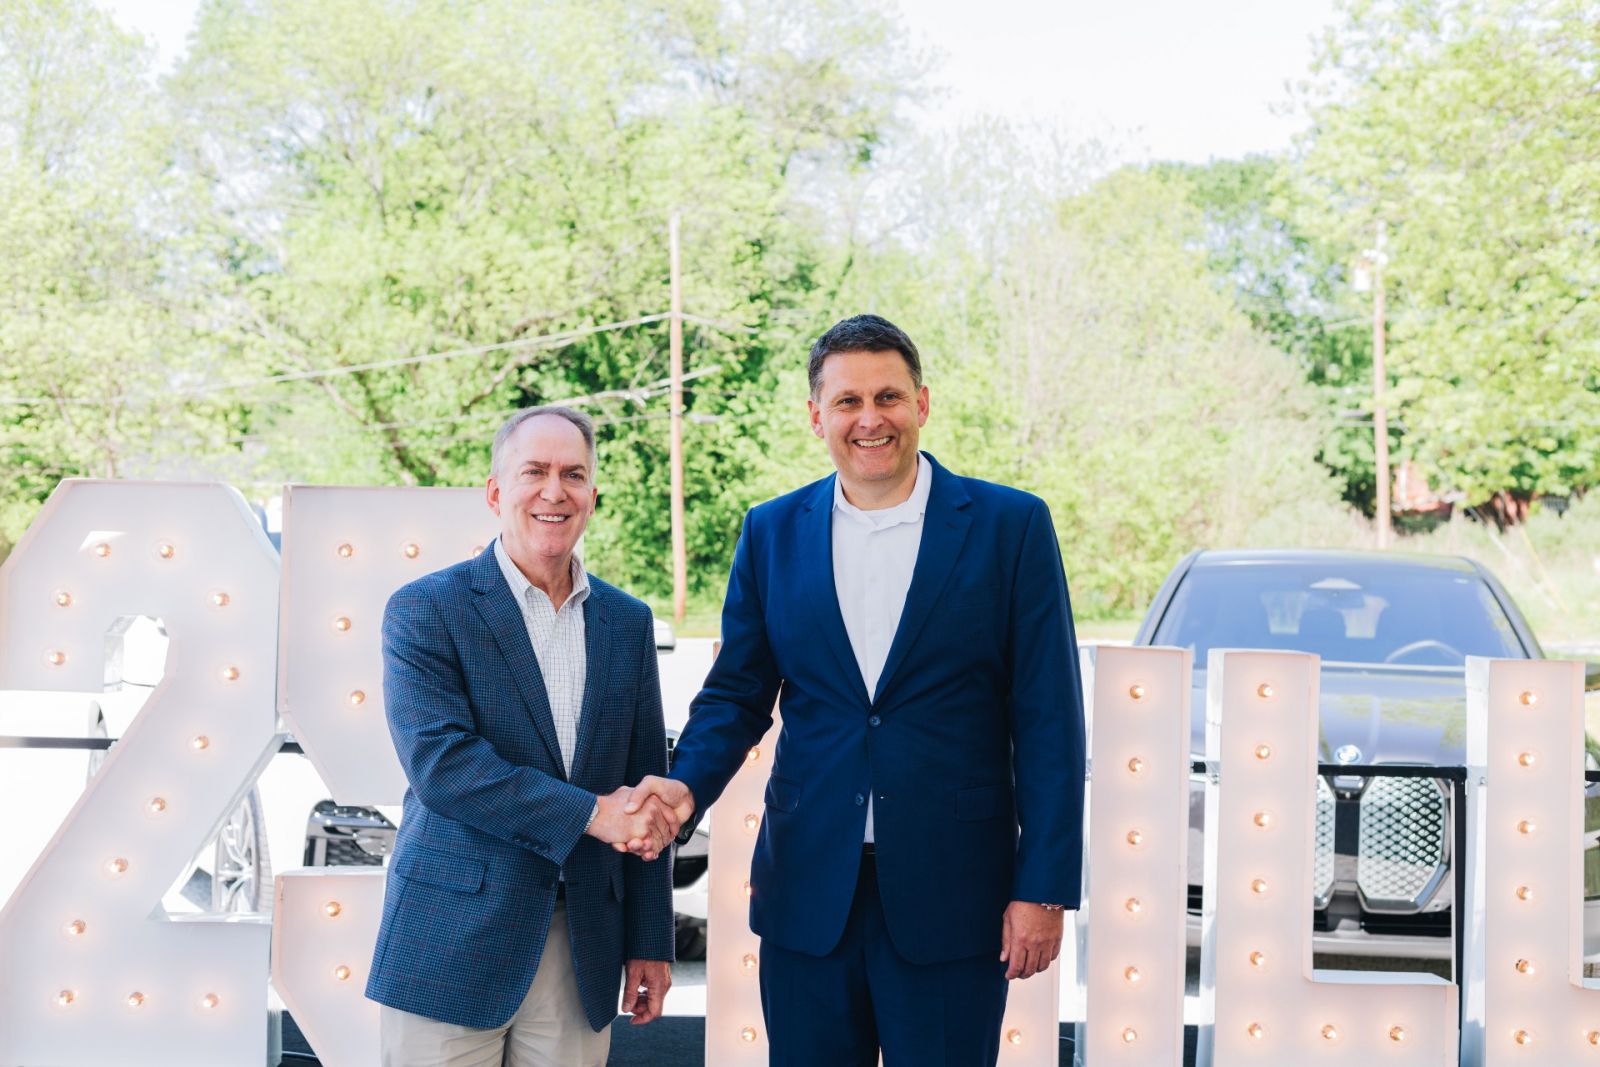 Greenville Mayor Knox White and BMW CEO Robert Engelhorn shake hands at the Wednesday press conference. (Photo/Provided)